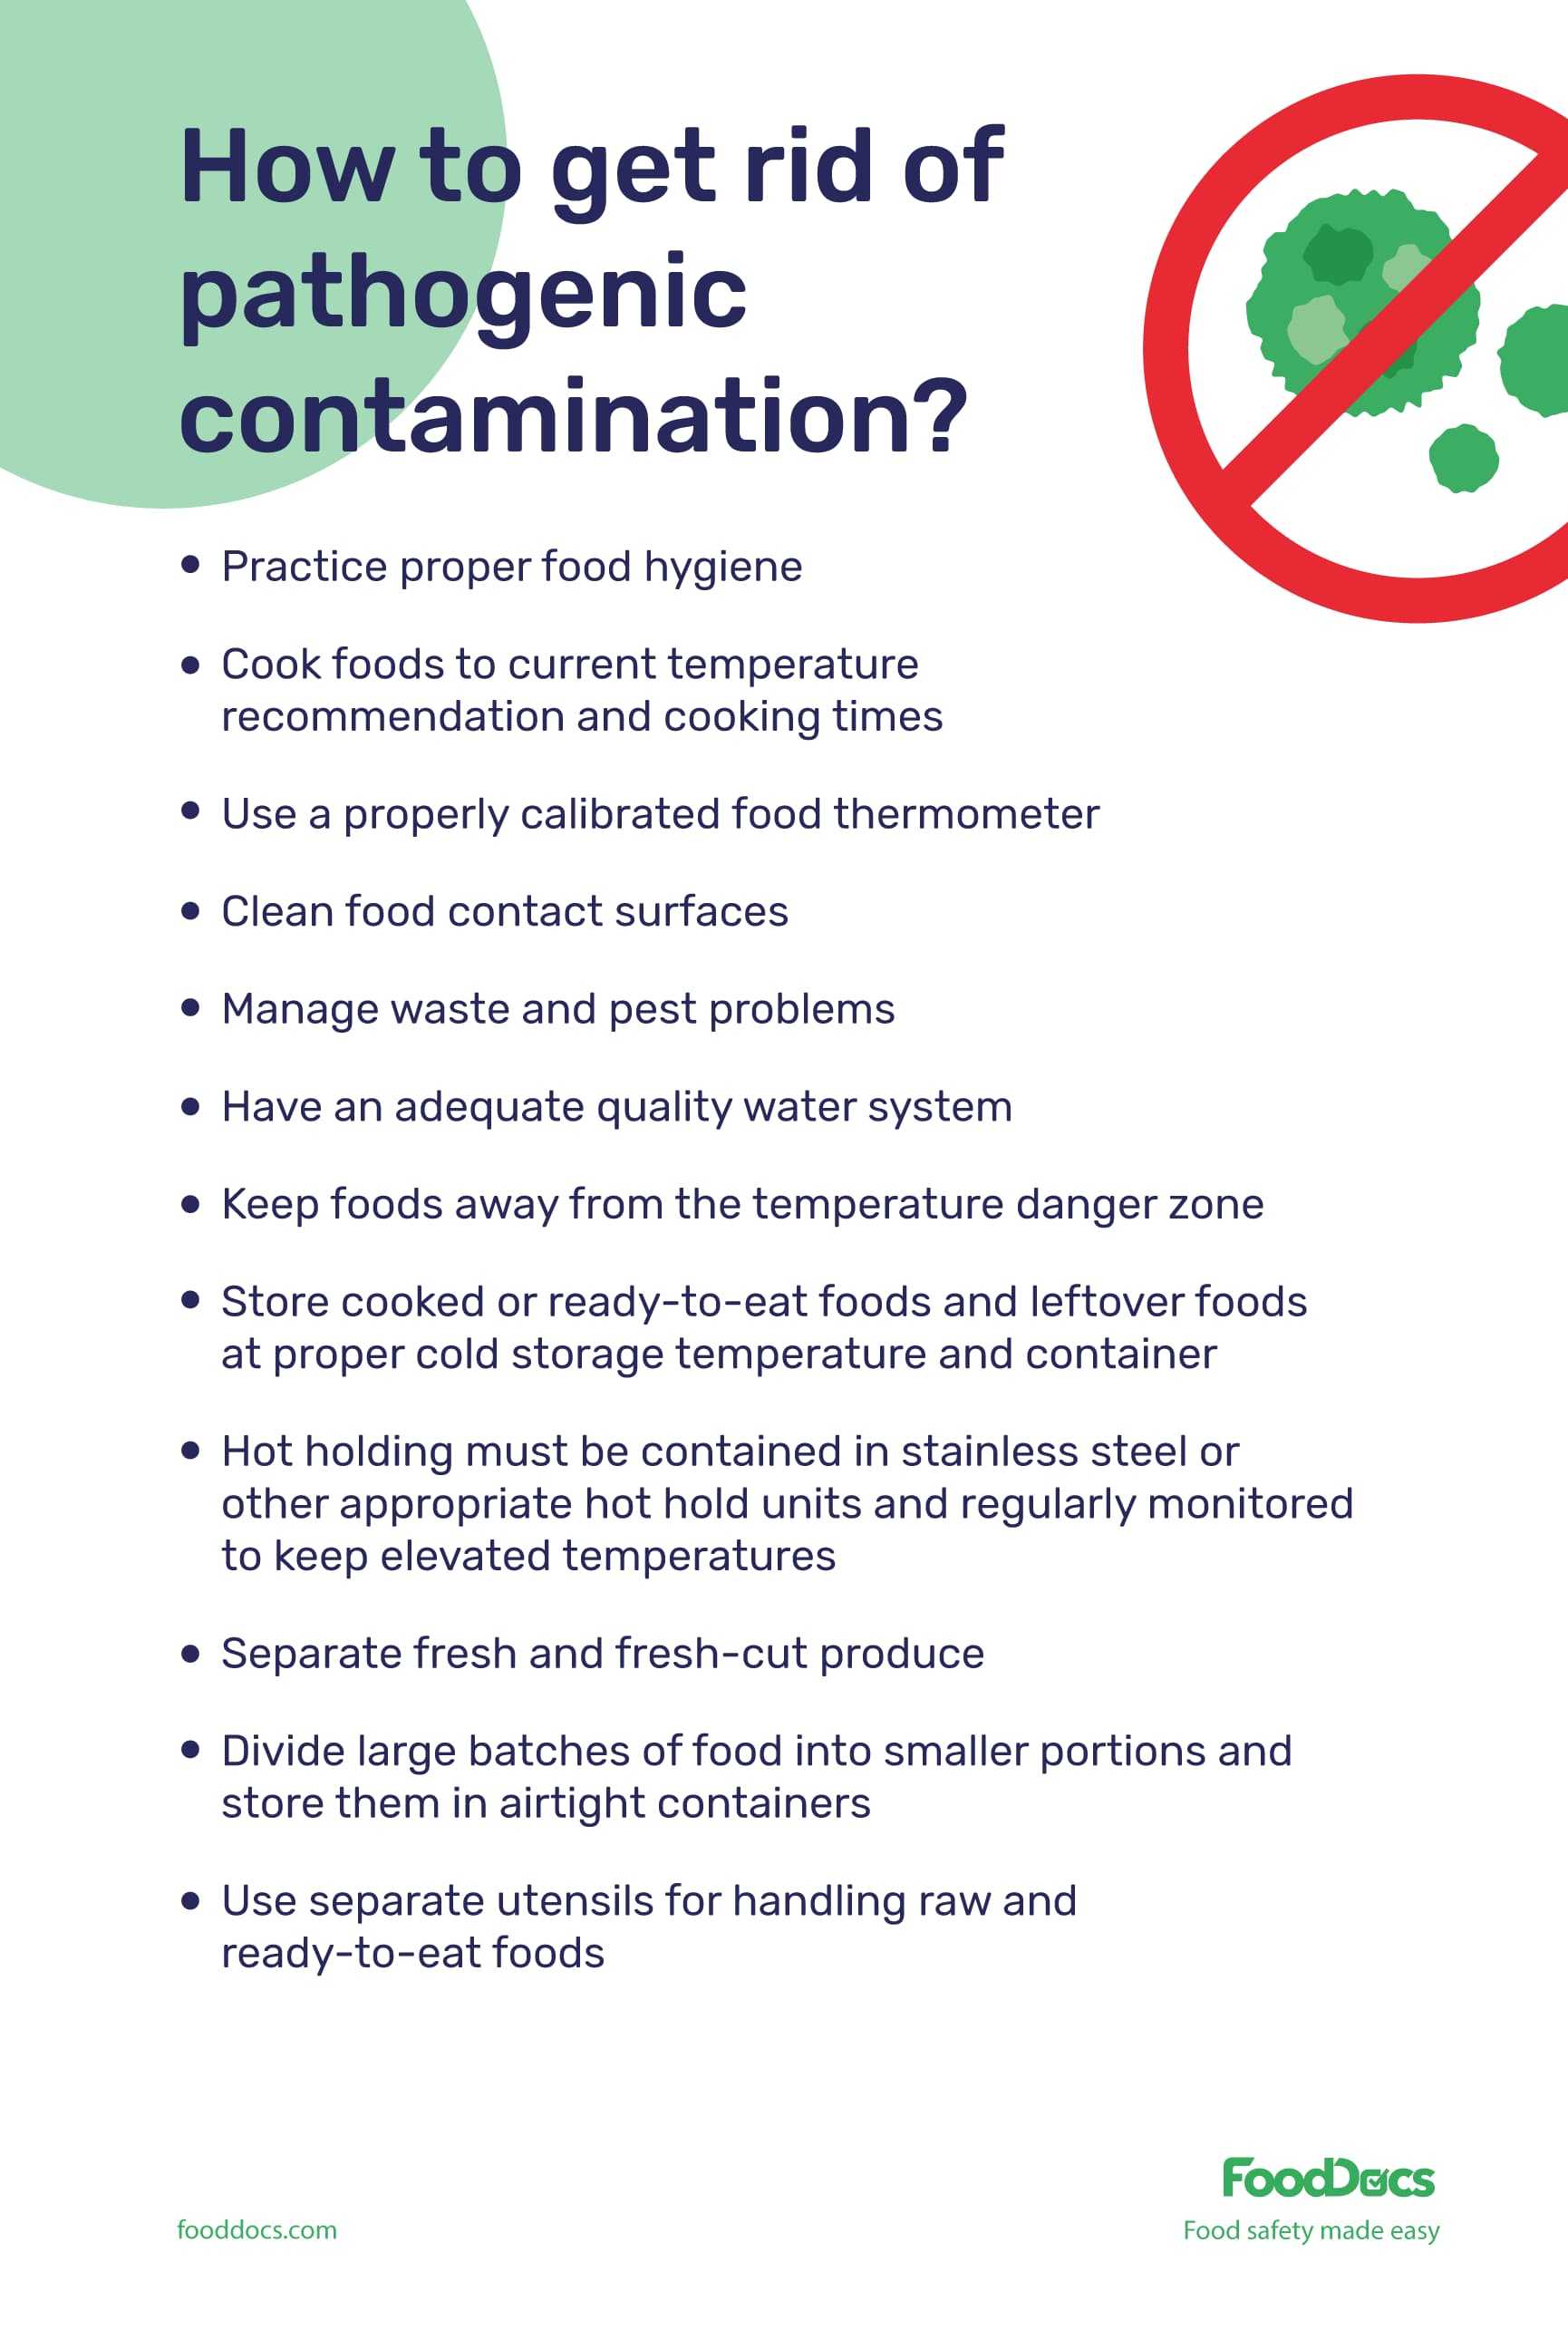 How to get rid of pathogenic contamination?